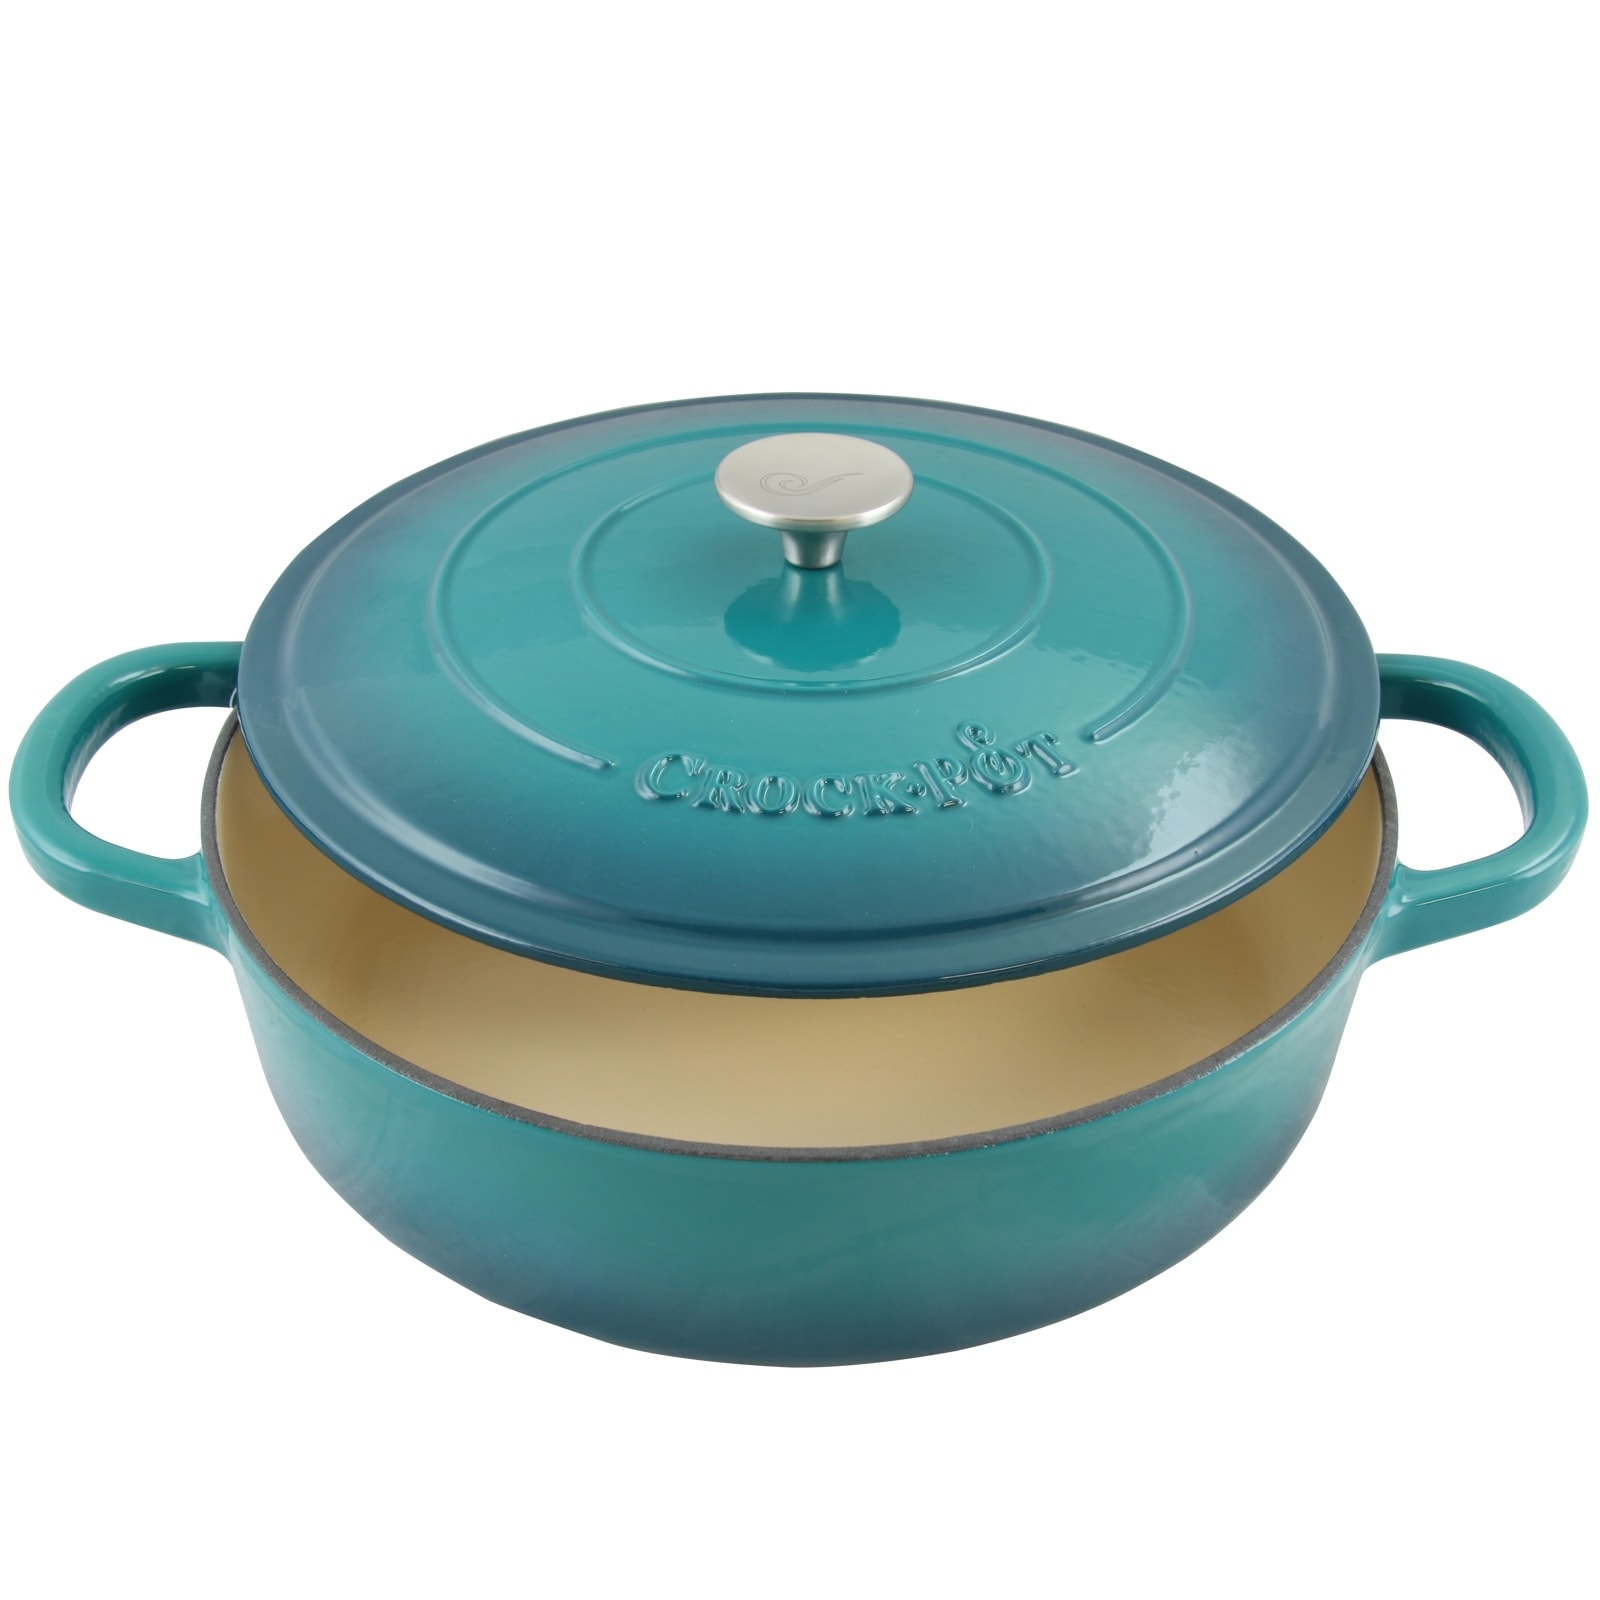 https://ak1.ostkcdn.com/images/products/is/images/direct/4652fcd940006059a9c2d5ec07ef23a5faf858bd/5-Quart-Round-Enameled-Cast-Iron-Braising-Pan-W-Lid-in-Turquoise-Ombre.jpg